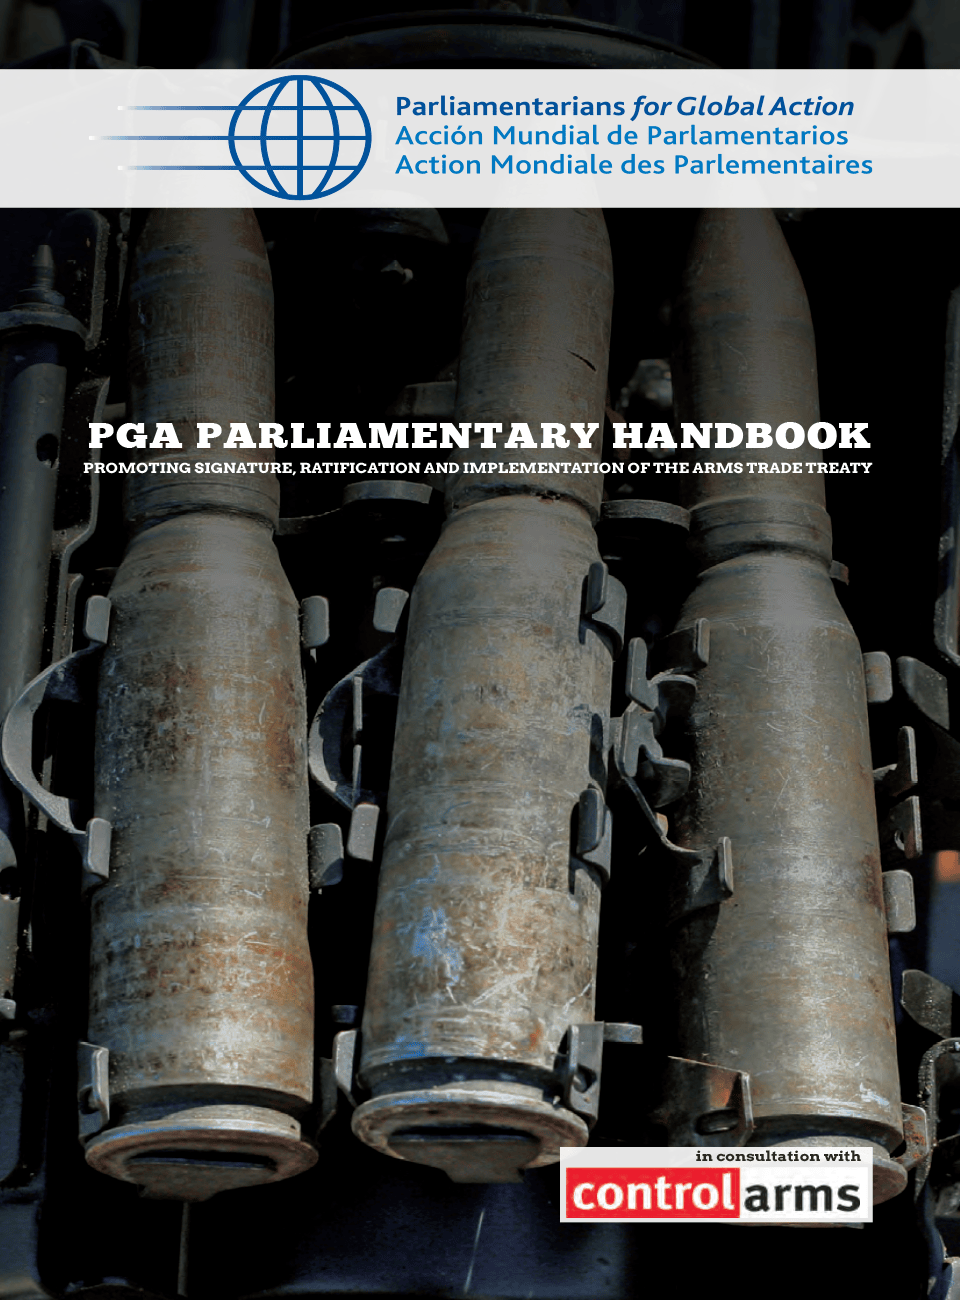 Parliamentary Handbook Promoting Signature, Ratification and Implementation of the ATT